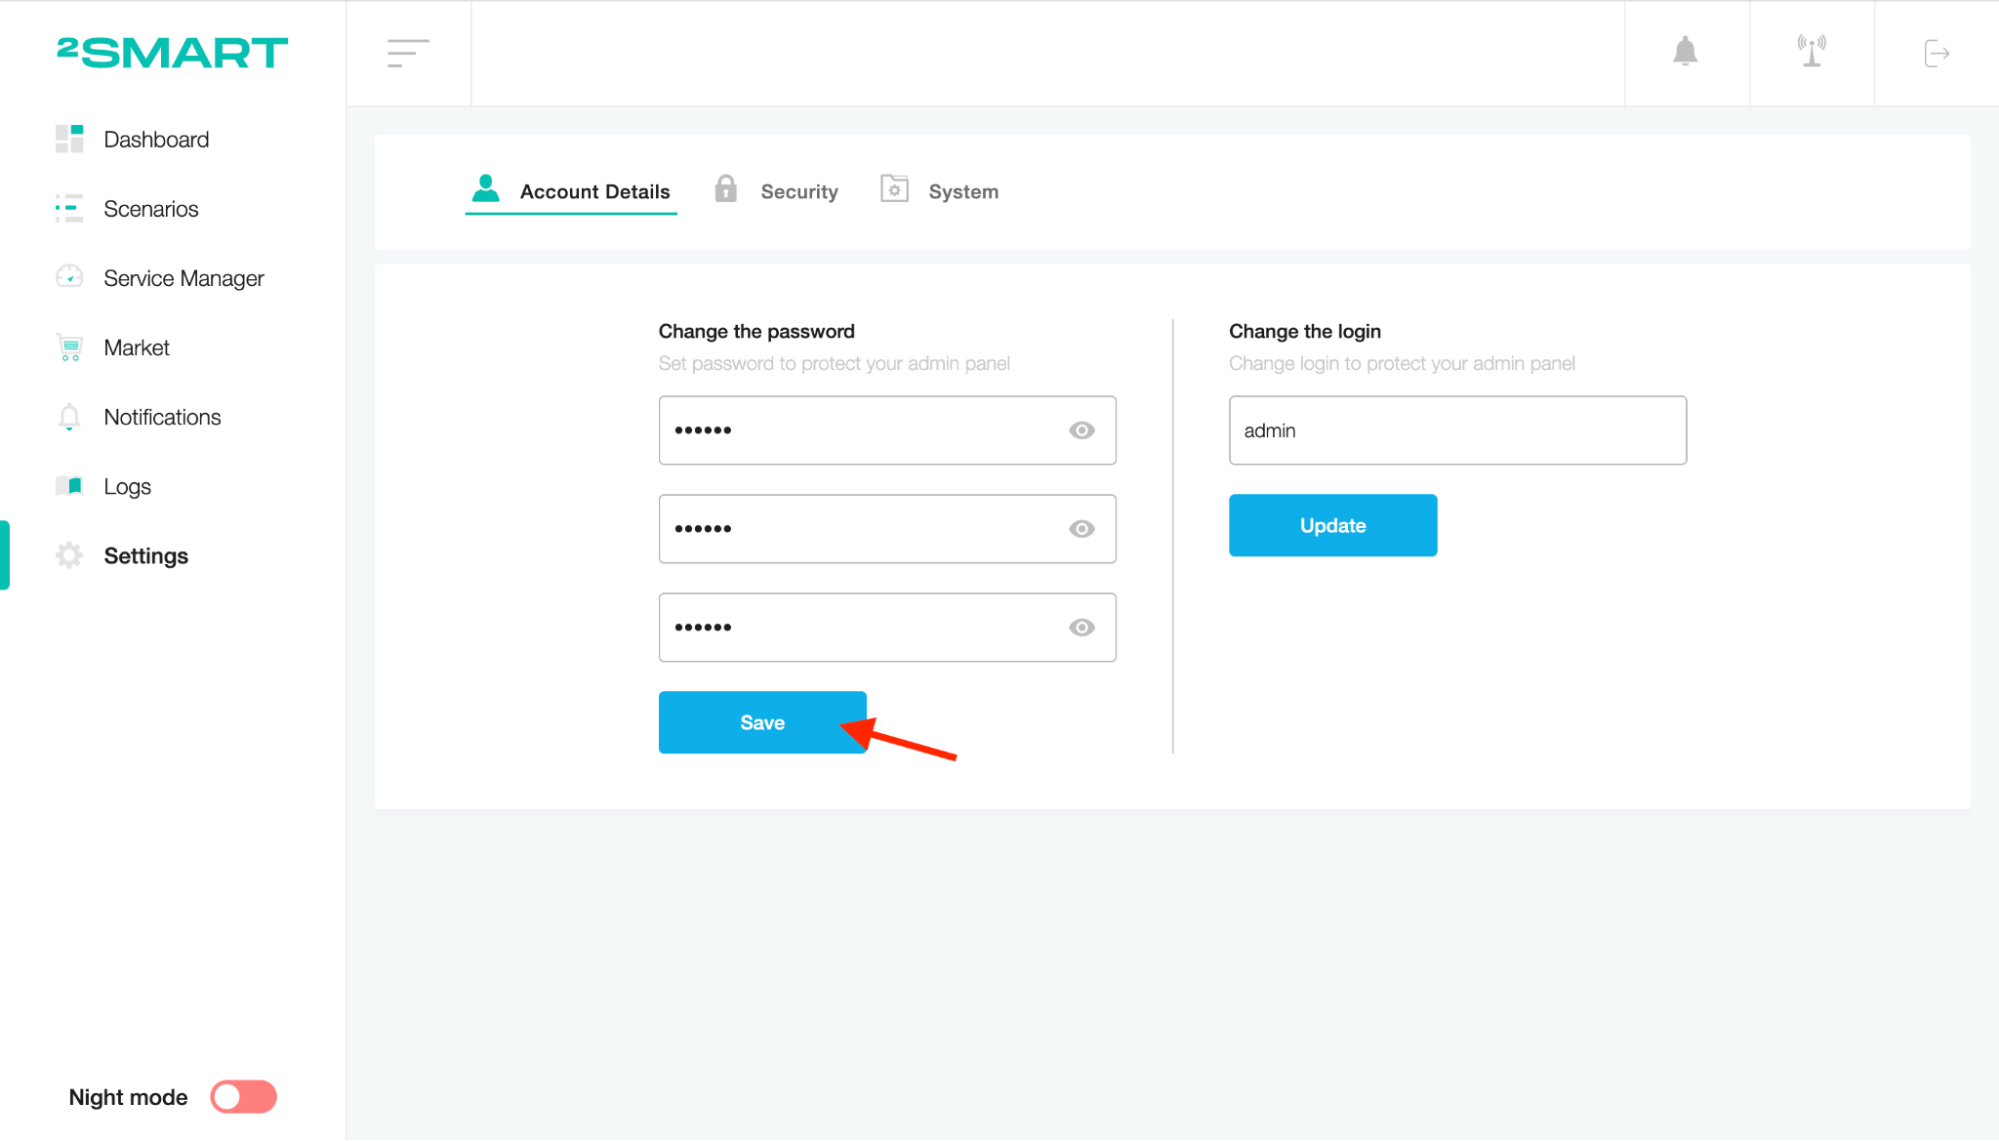 The Account Details tab